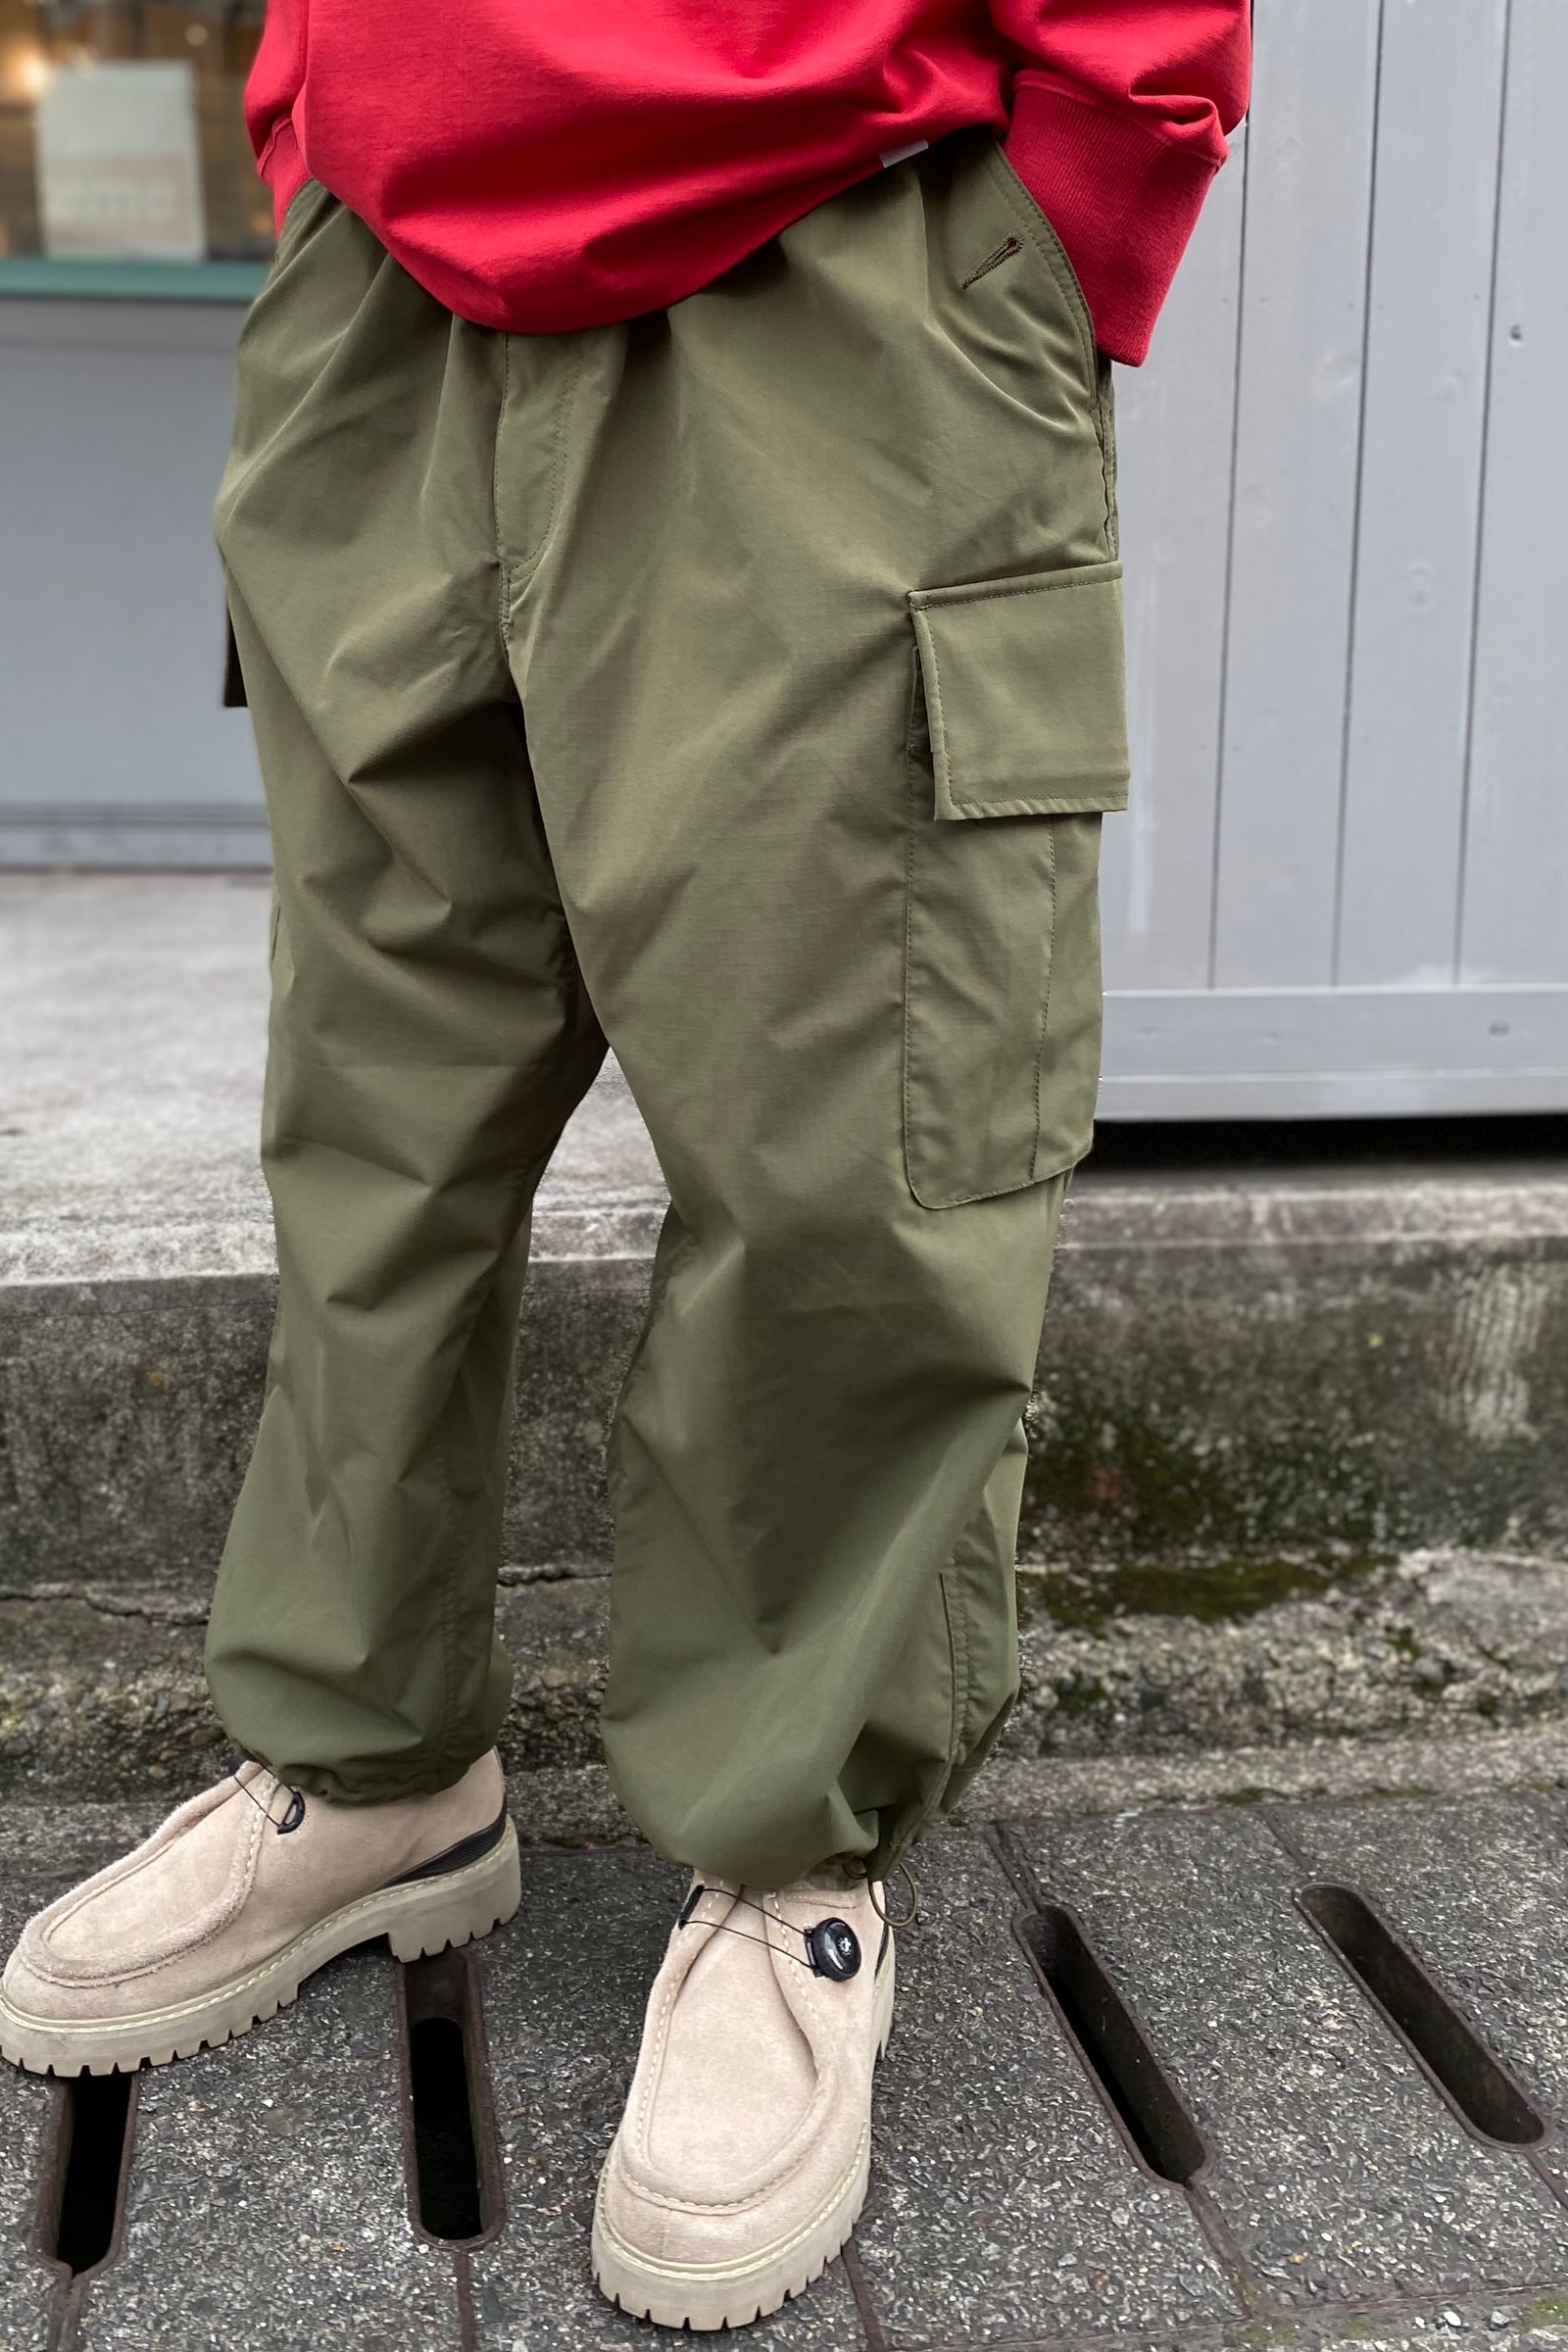 tech wide 6p pants/rip-stop 21aw - M - OLIVE